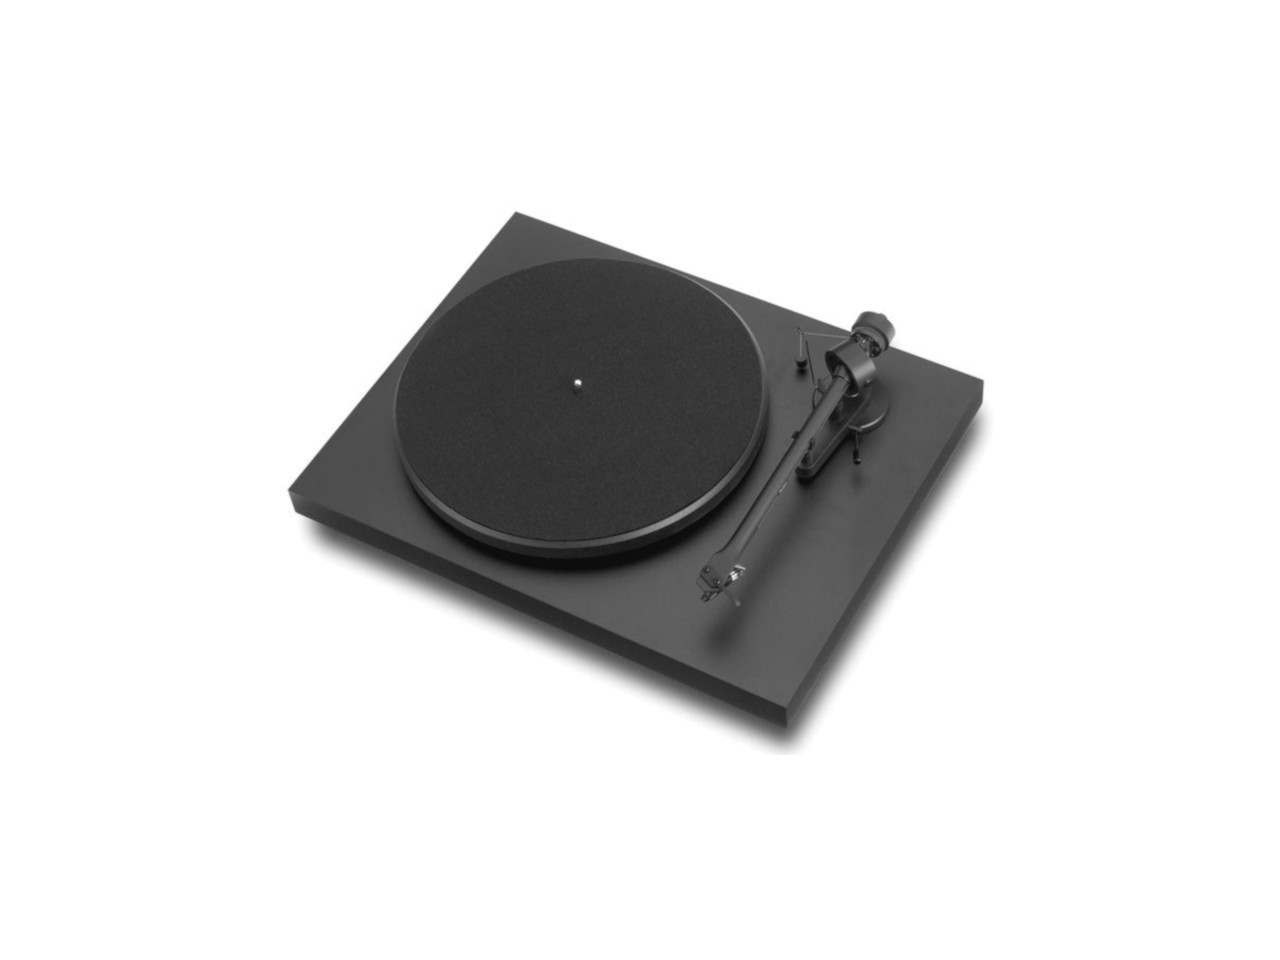 Pro-Ject Debut III DC Black